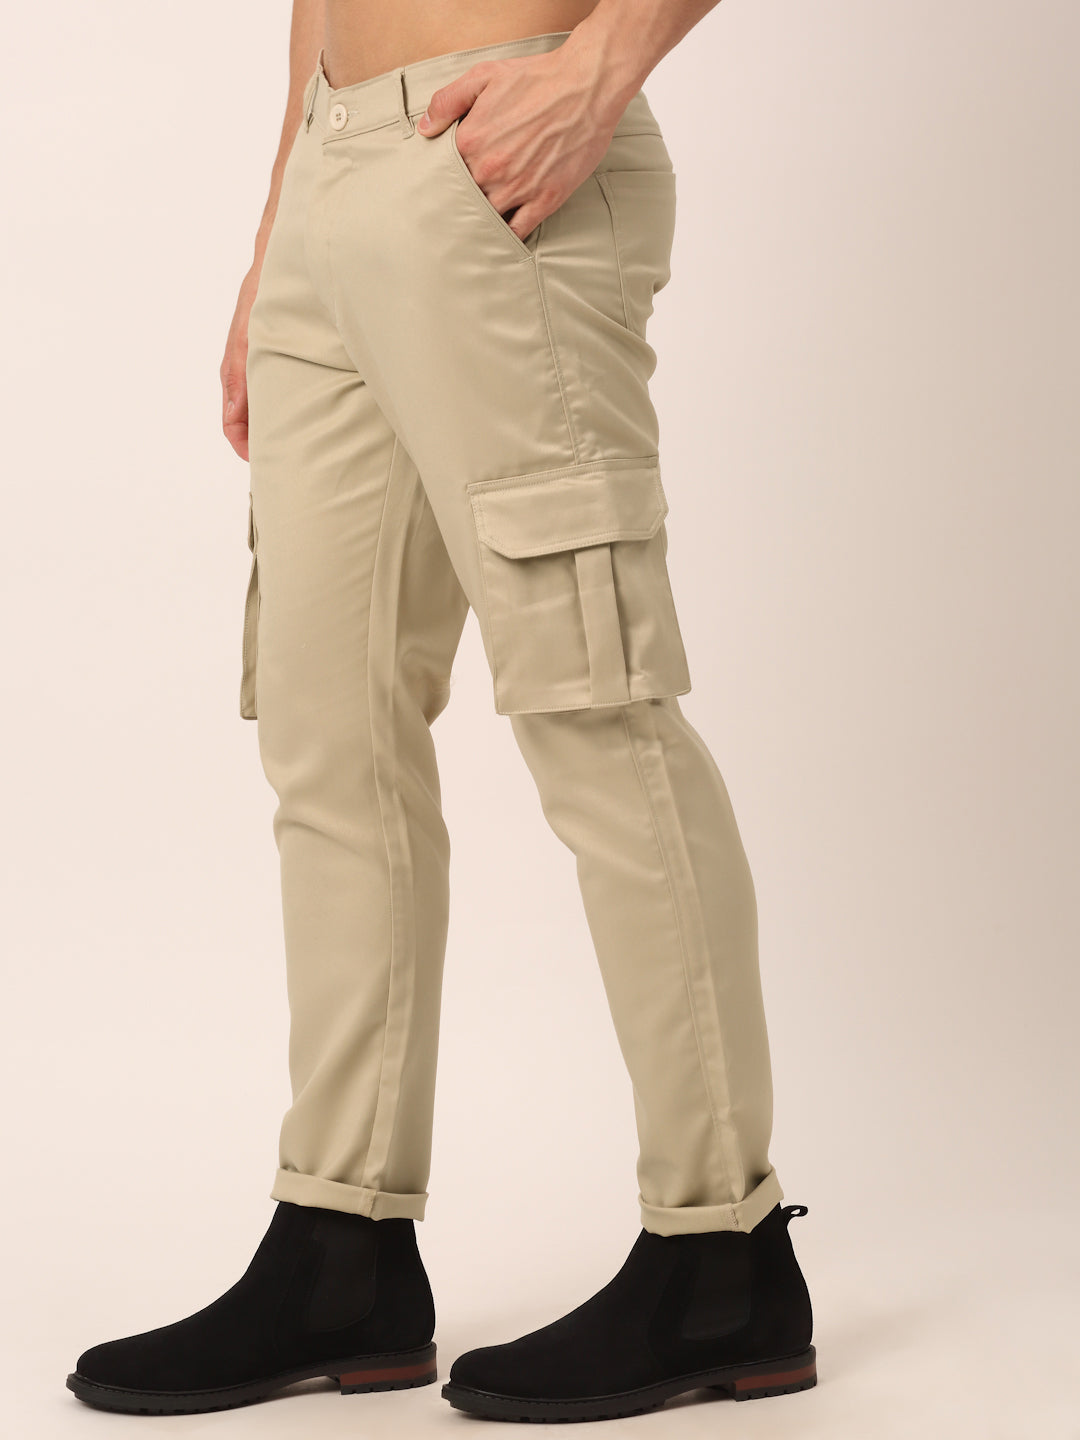 CHUU String Belted Cargo Pants | Australia delivery | CHUU